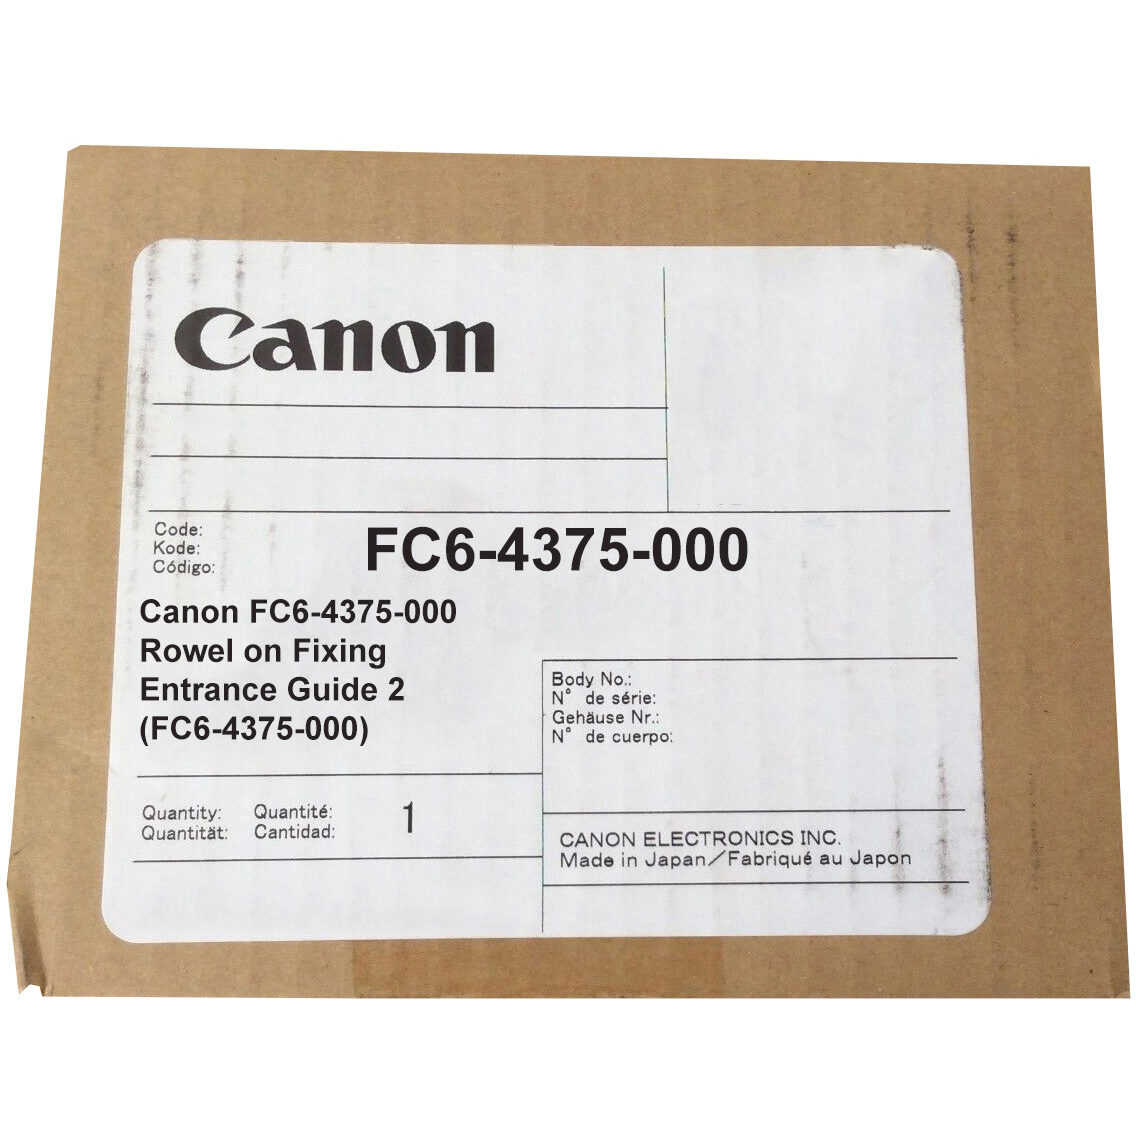 Original Canon FC6-4375-000 Rowel on Fixing Entrance Guide 2 (FC6-4375-000)